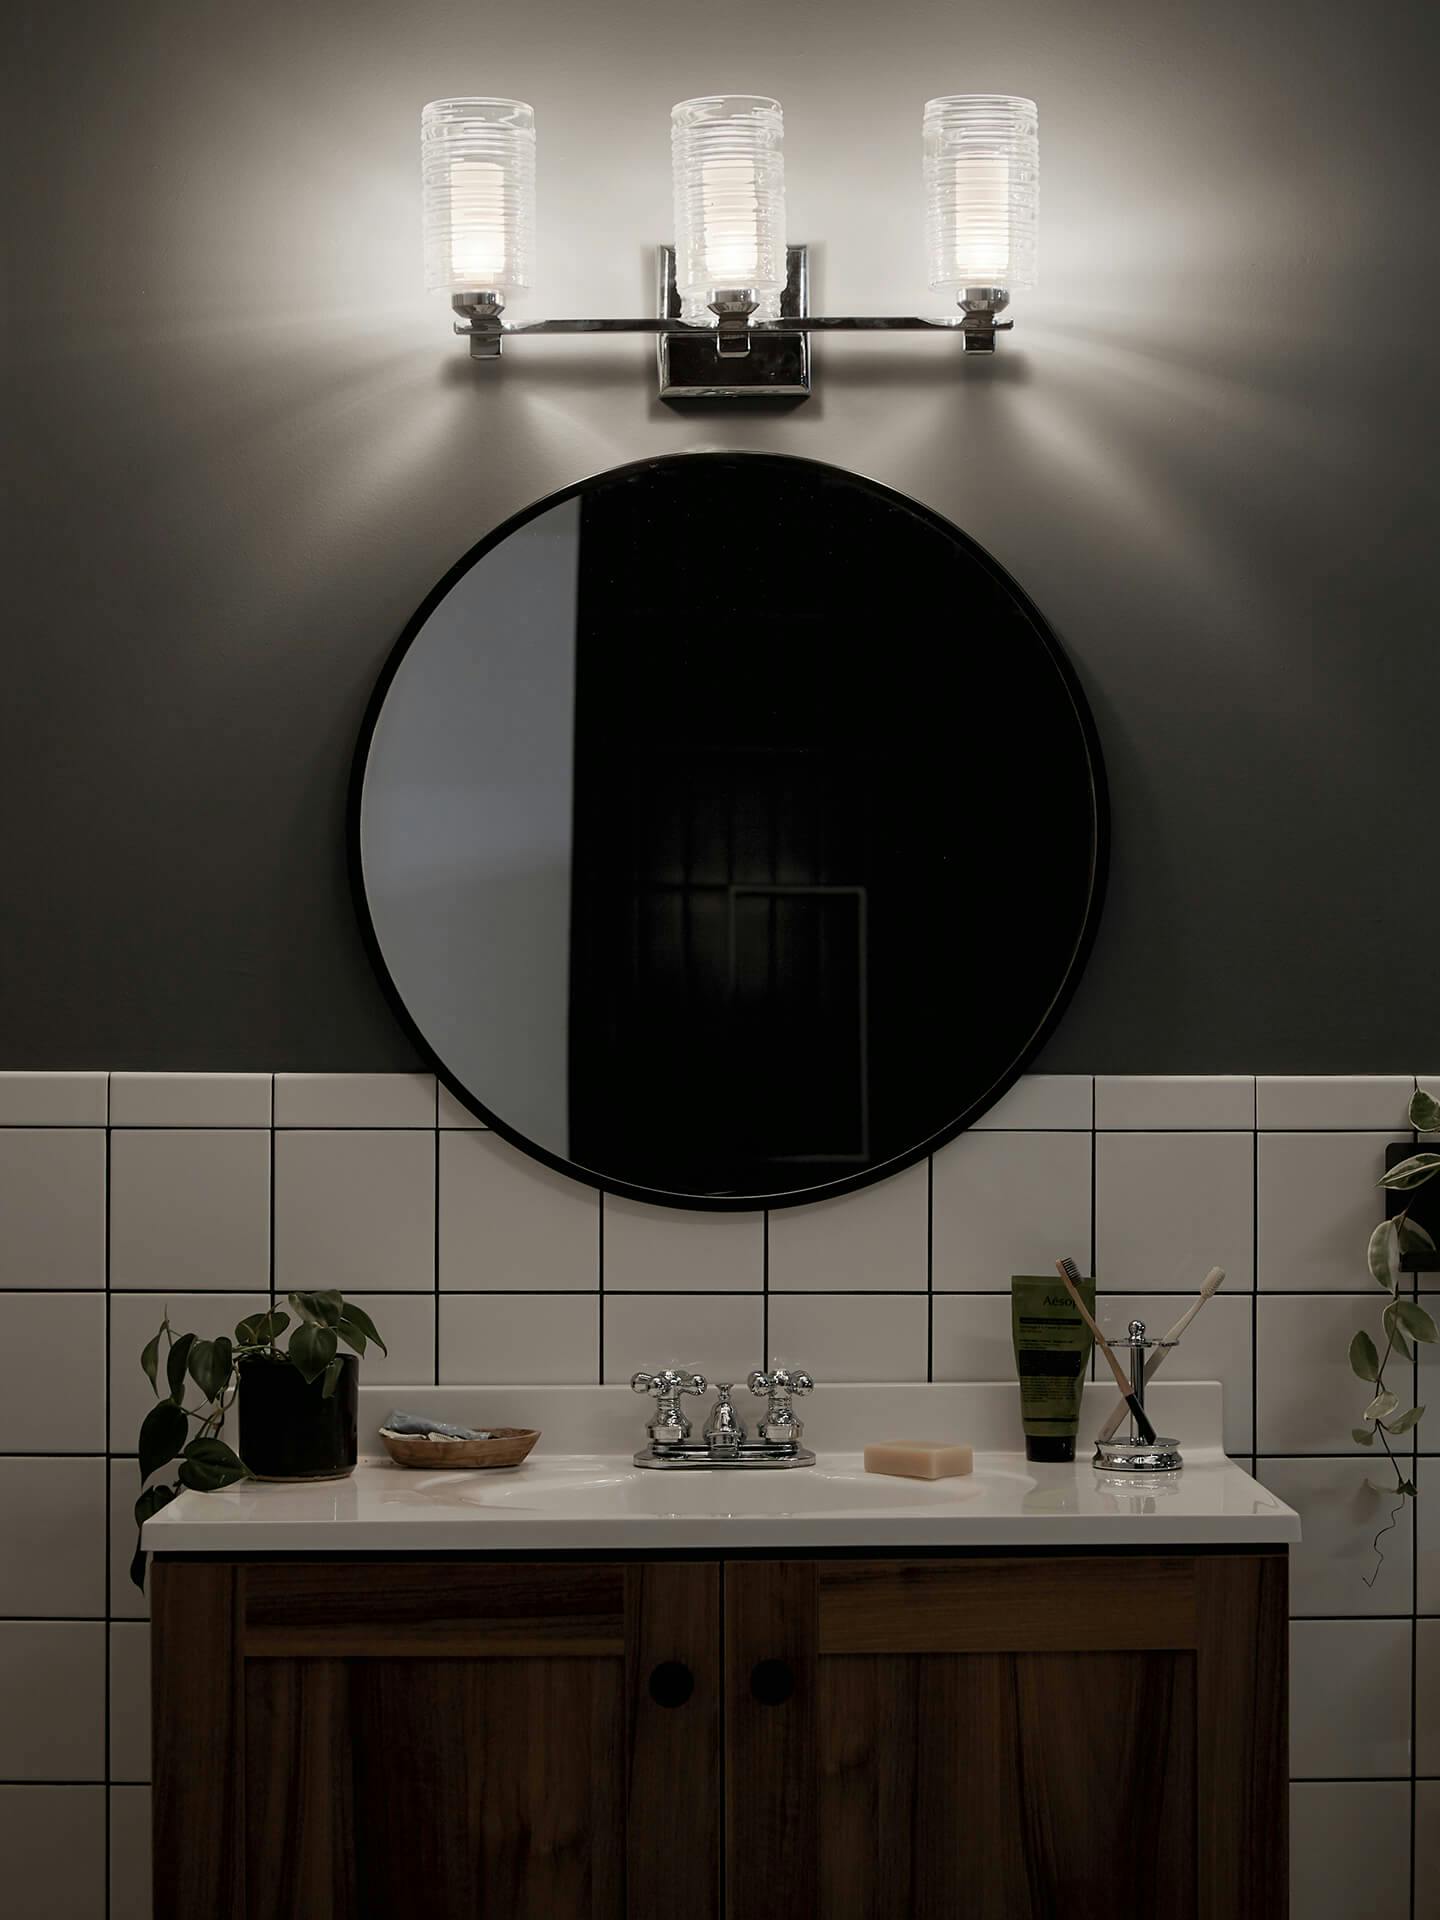 Modern bathroom at night with only Giarosa vanity lights on above a round mirror